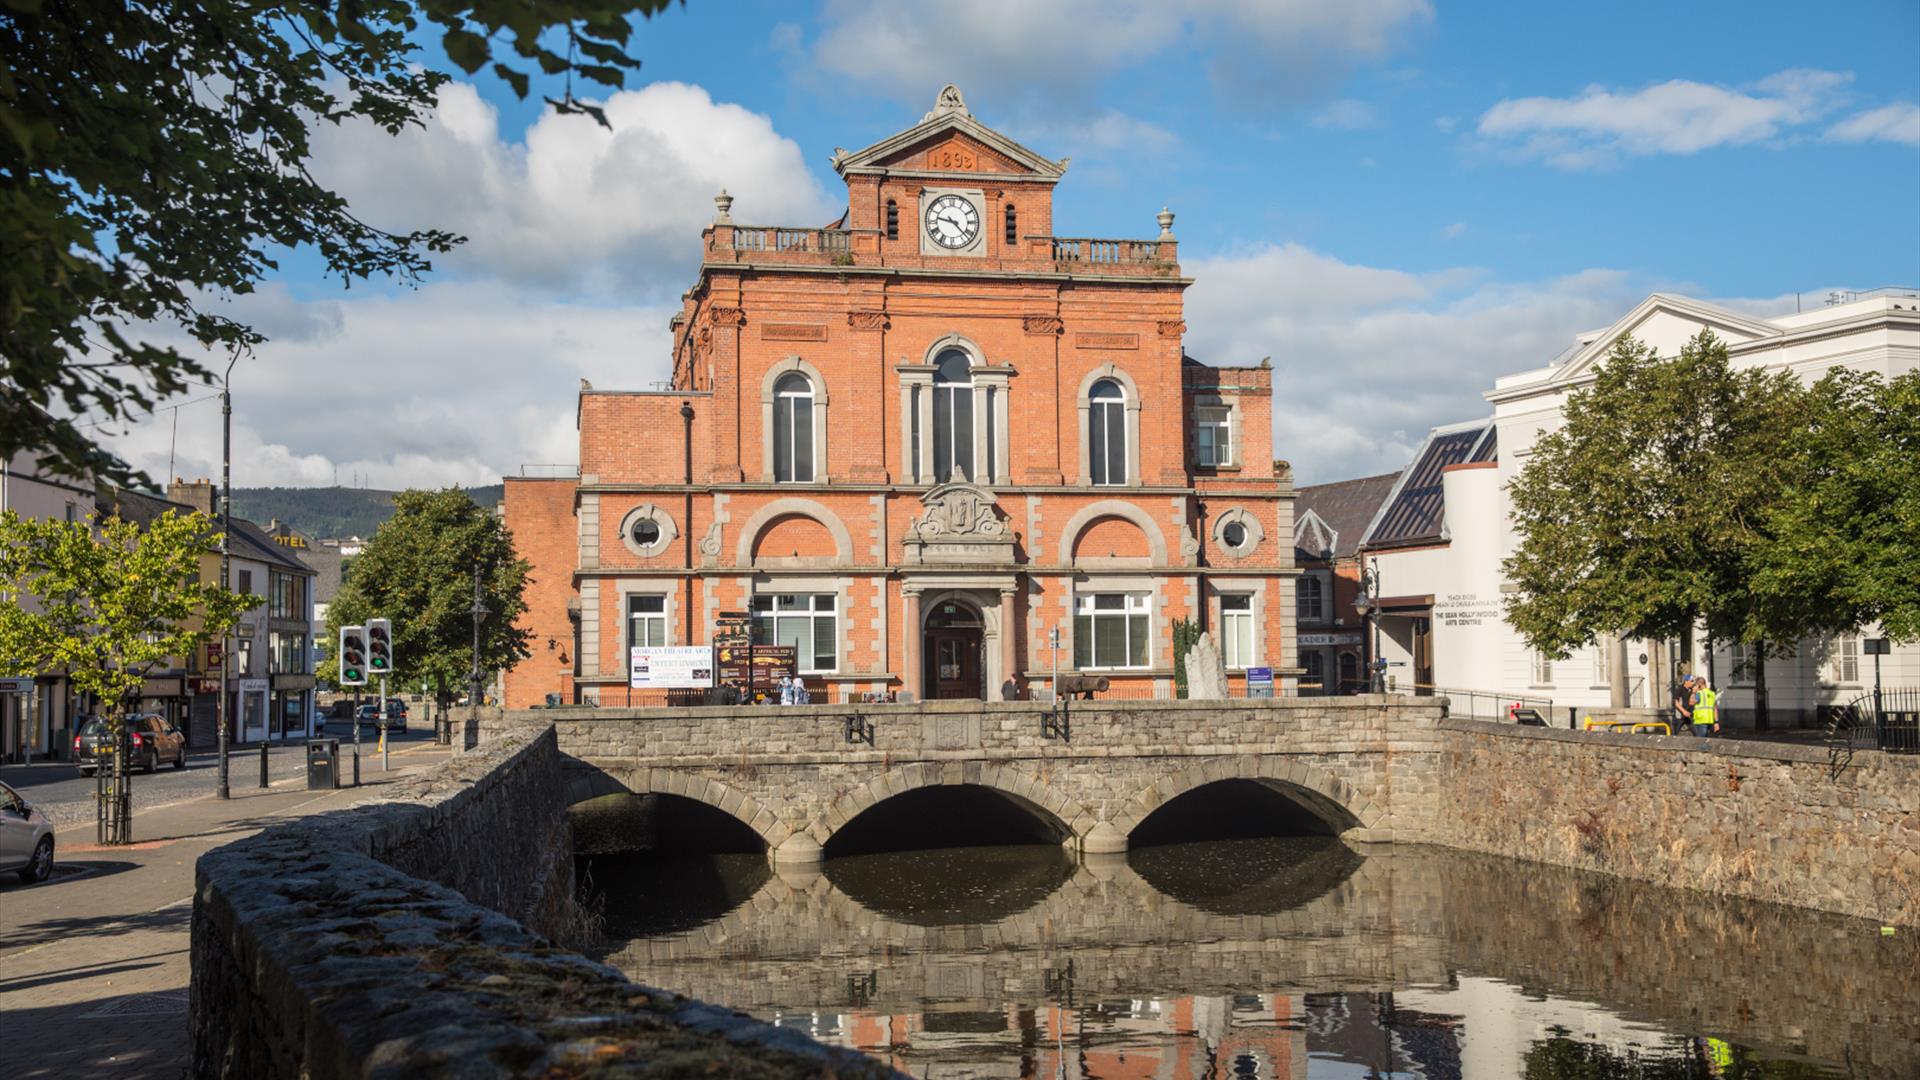 Newry Town Hall overlooking river